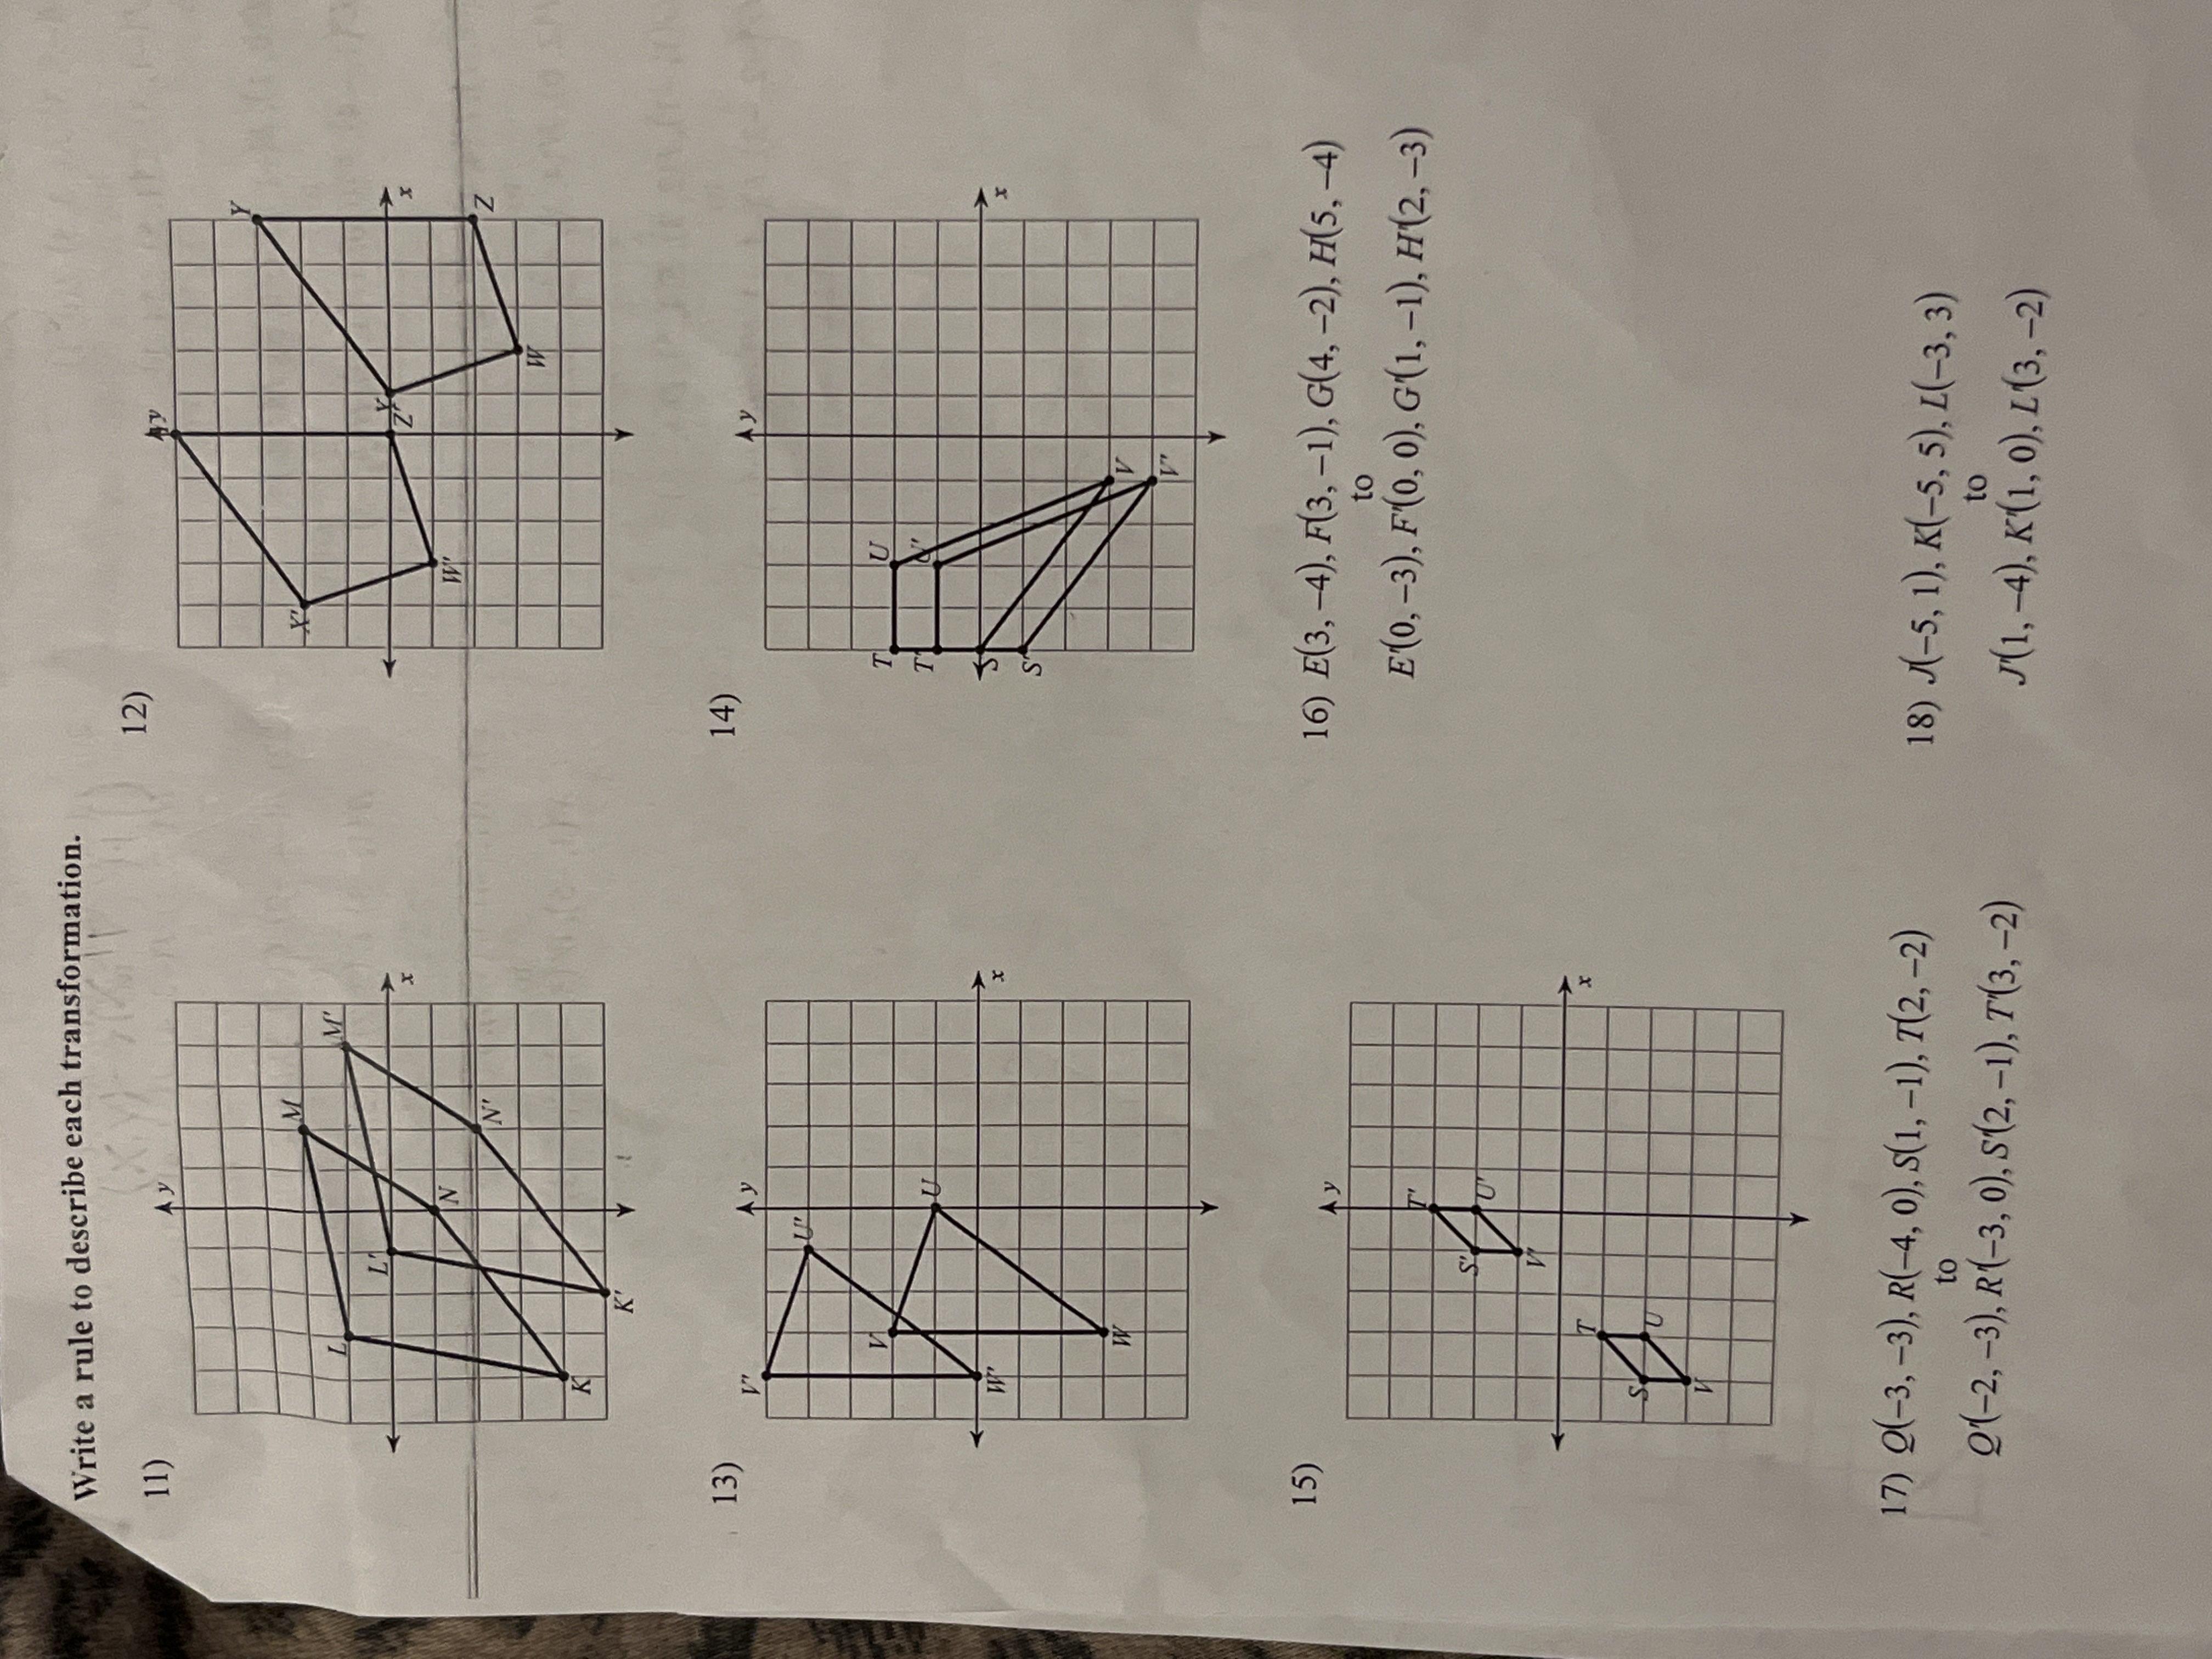 Can Someone Help With These Two Pages If Possible?